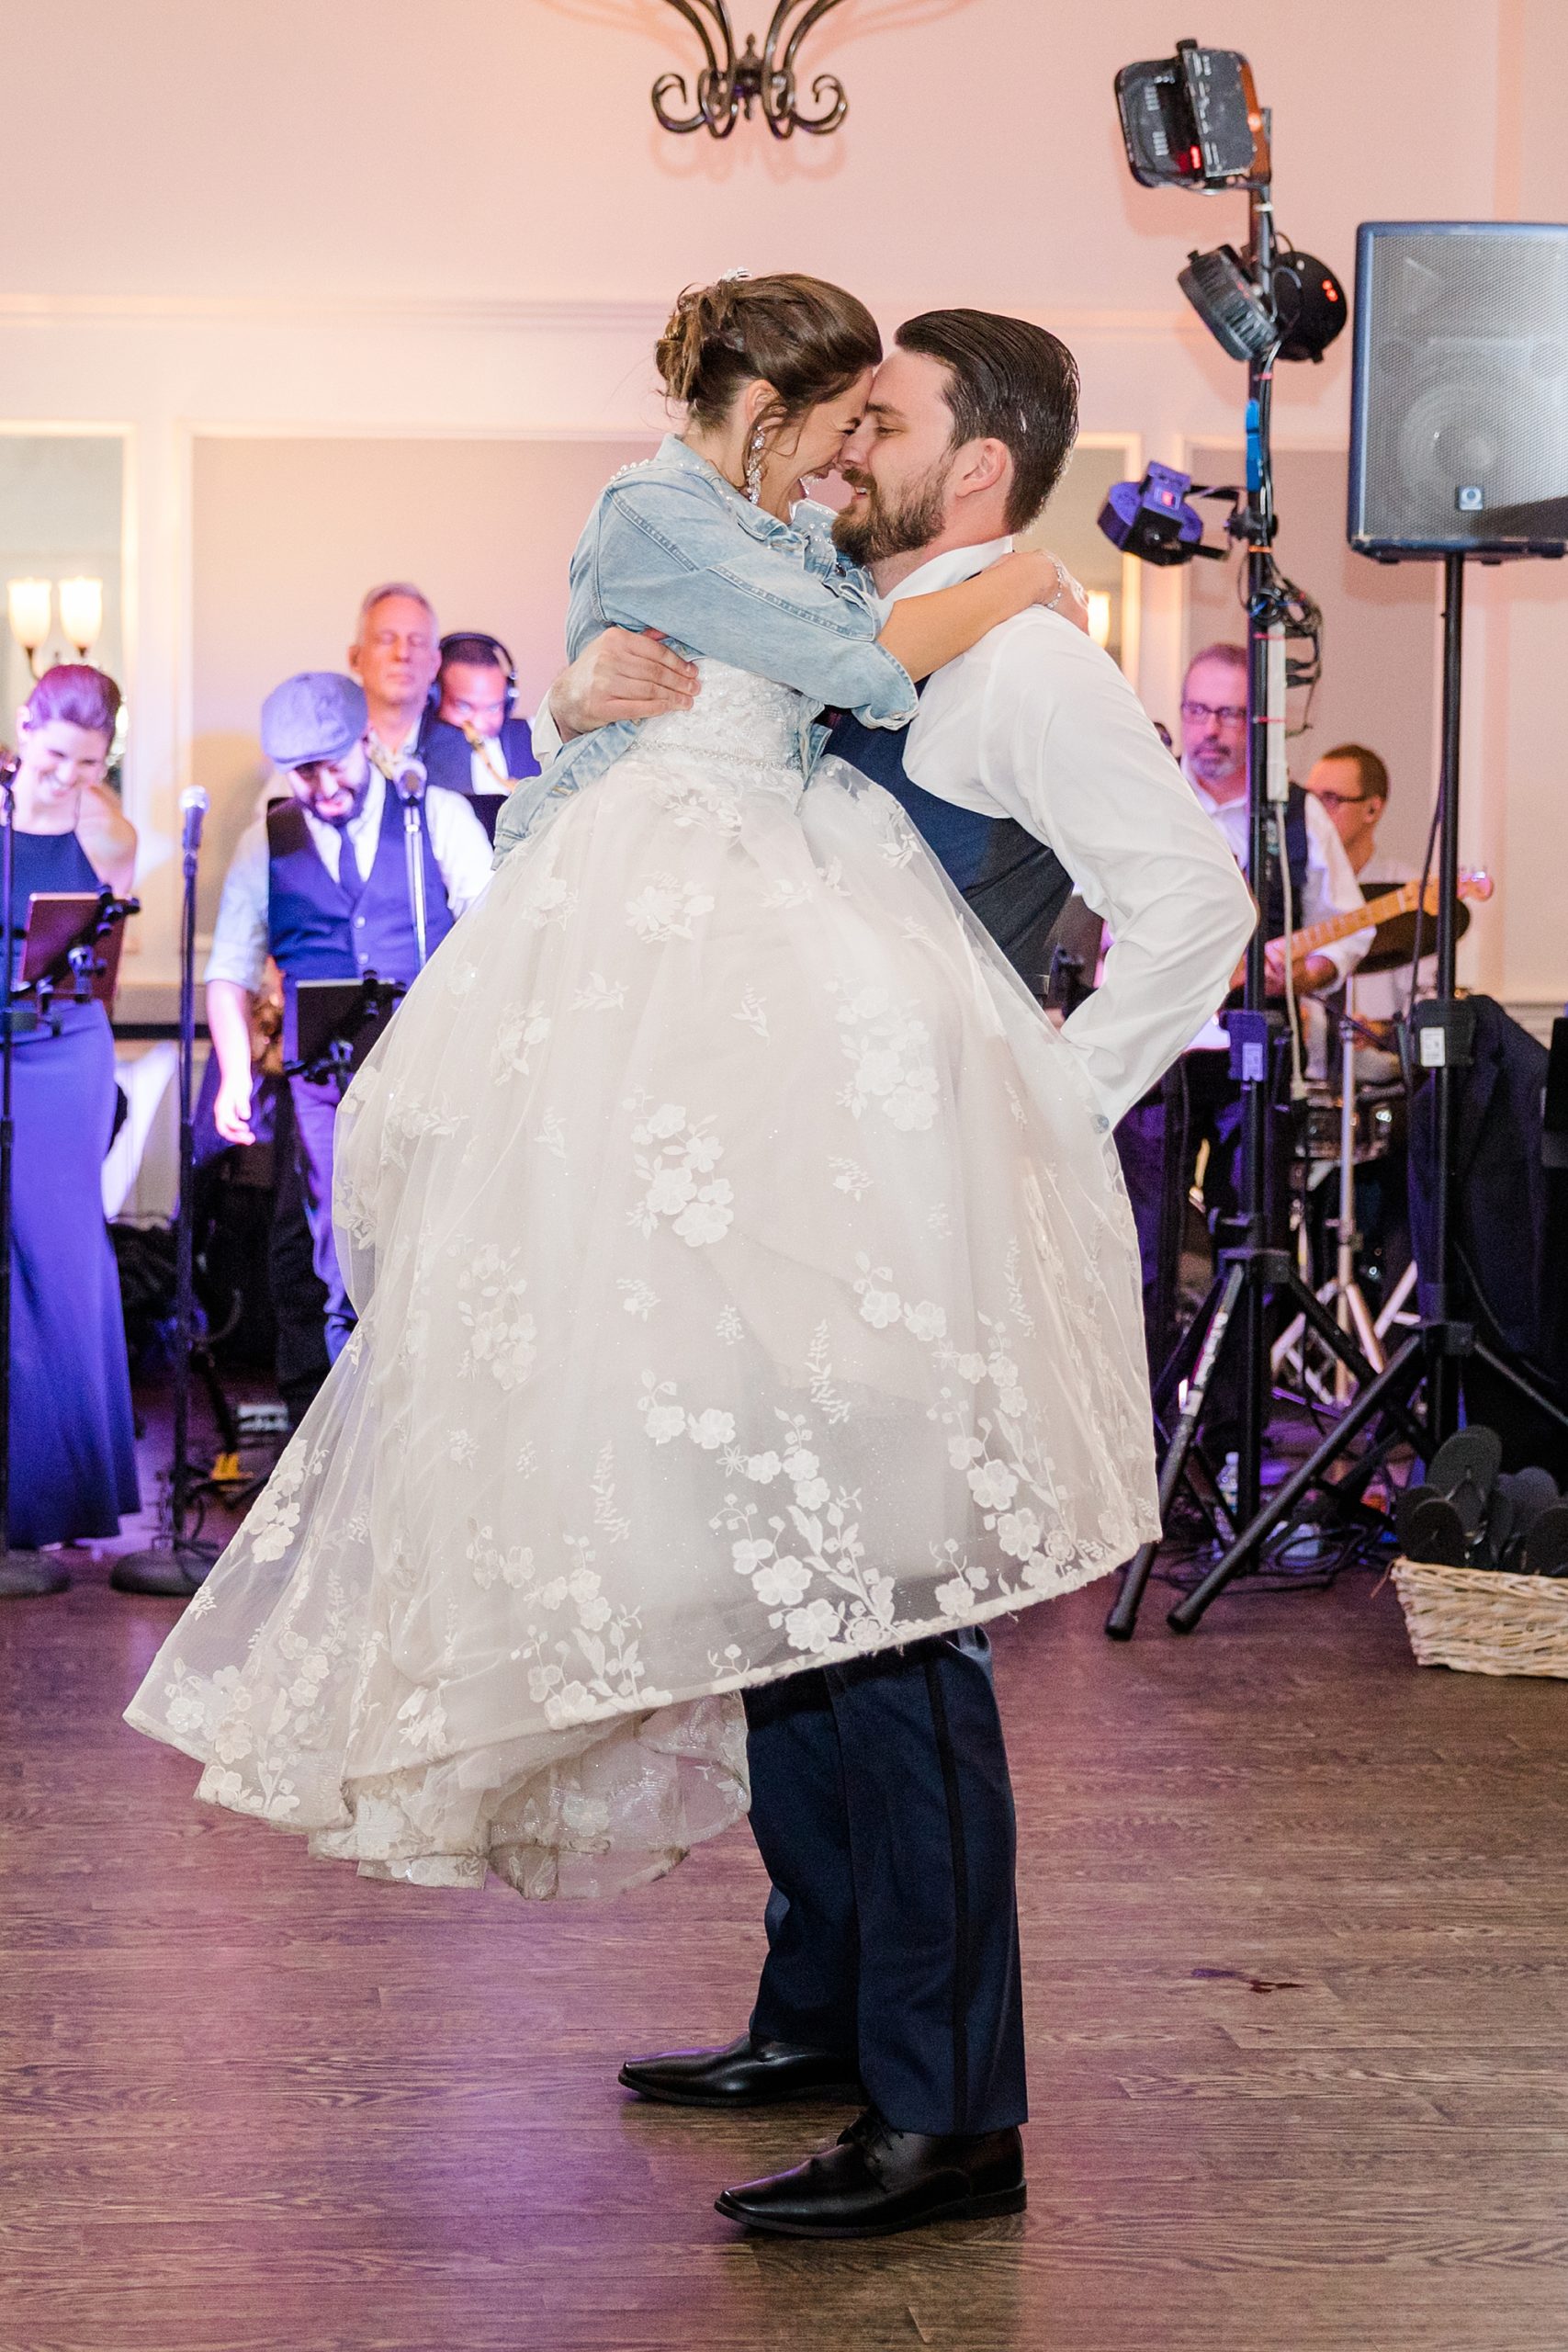 groom holds bride in arms on the dance floor